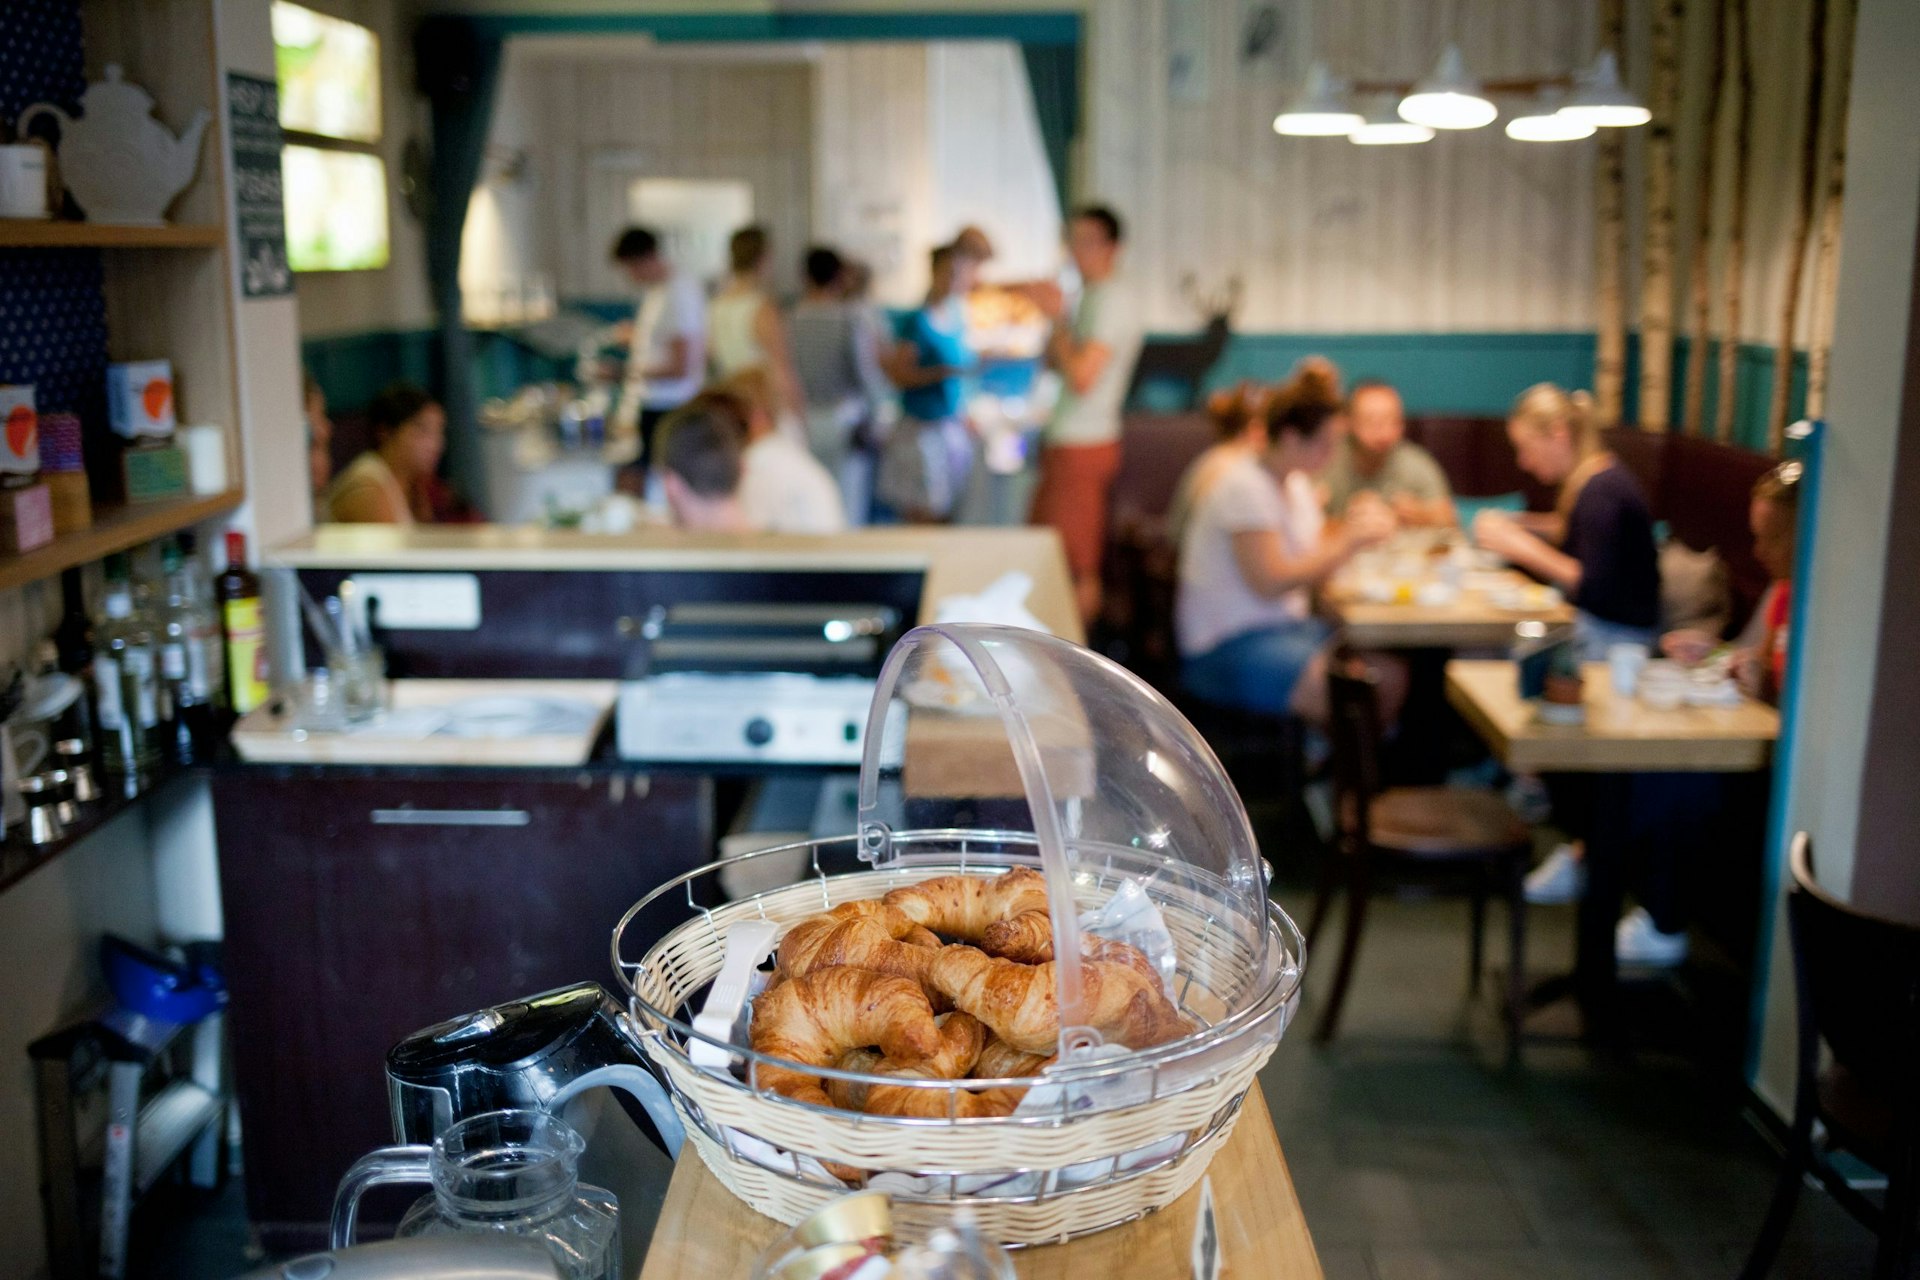 A close-up of some croissants on a bar in a half-domed glass bowl; the blurred background shows people sitting in a communal area of a hostel